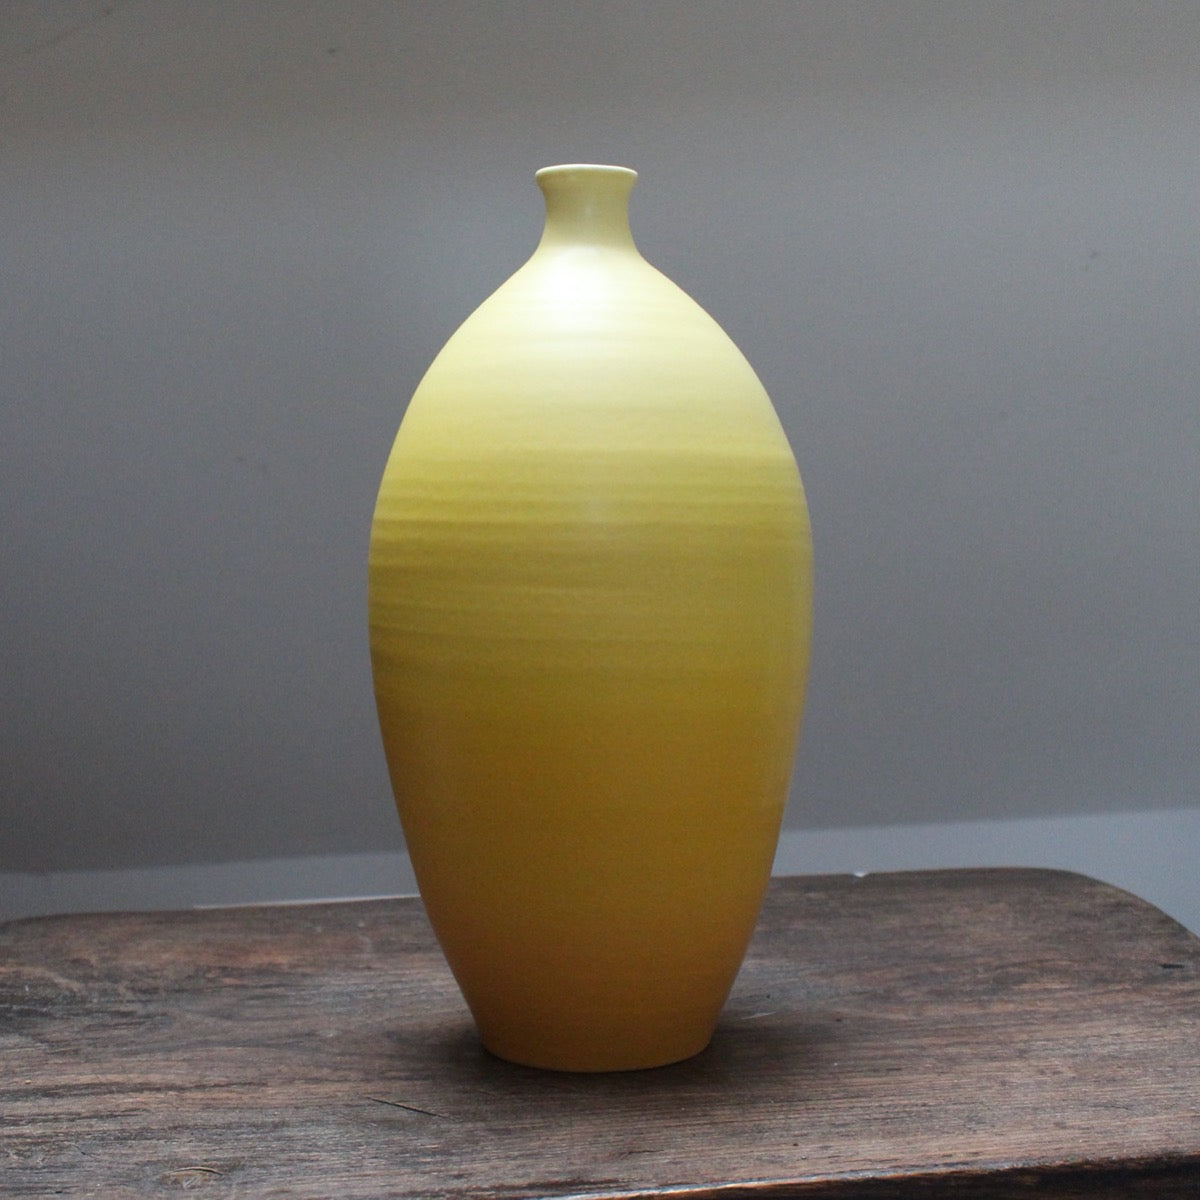 Tall yellow curved bottle by Lucy Burley on a wooden table